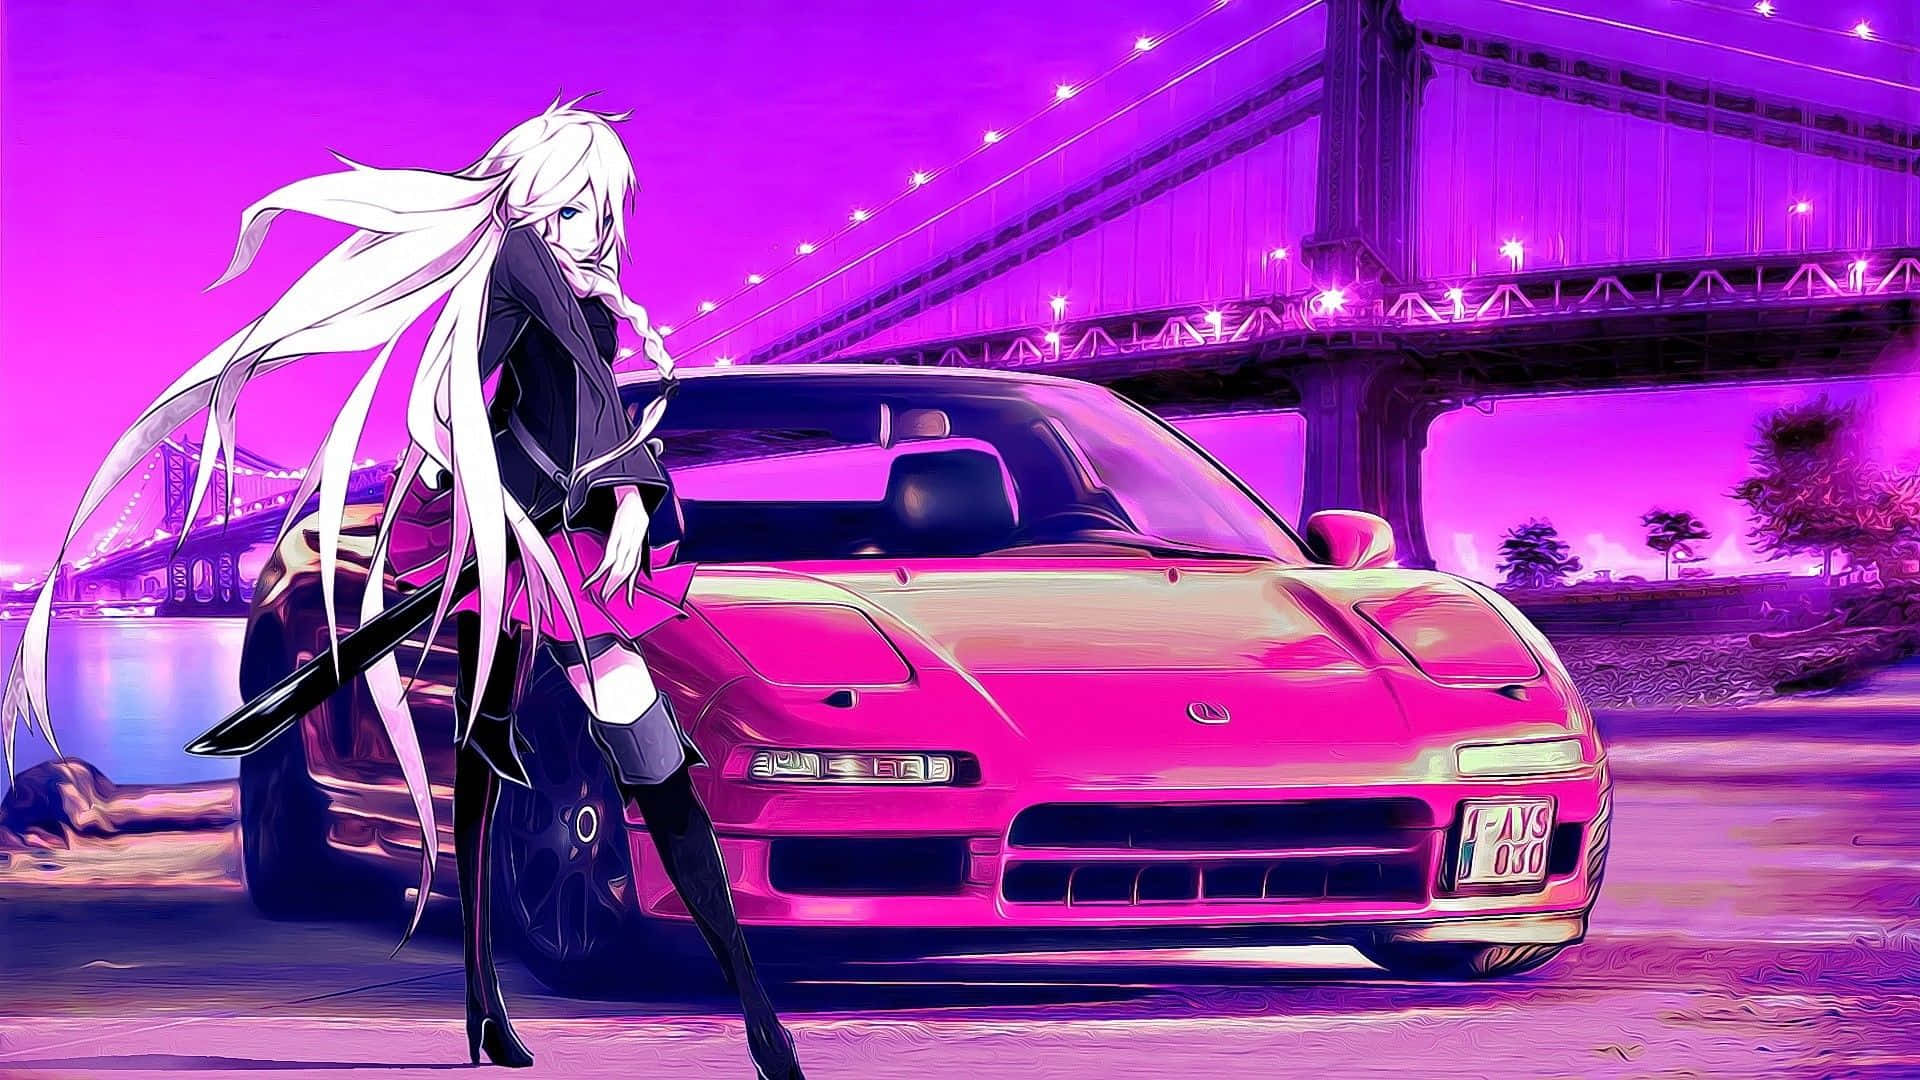 Anime Cars Of The World - Anime your car it will look good 😄 | Facebook